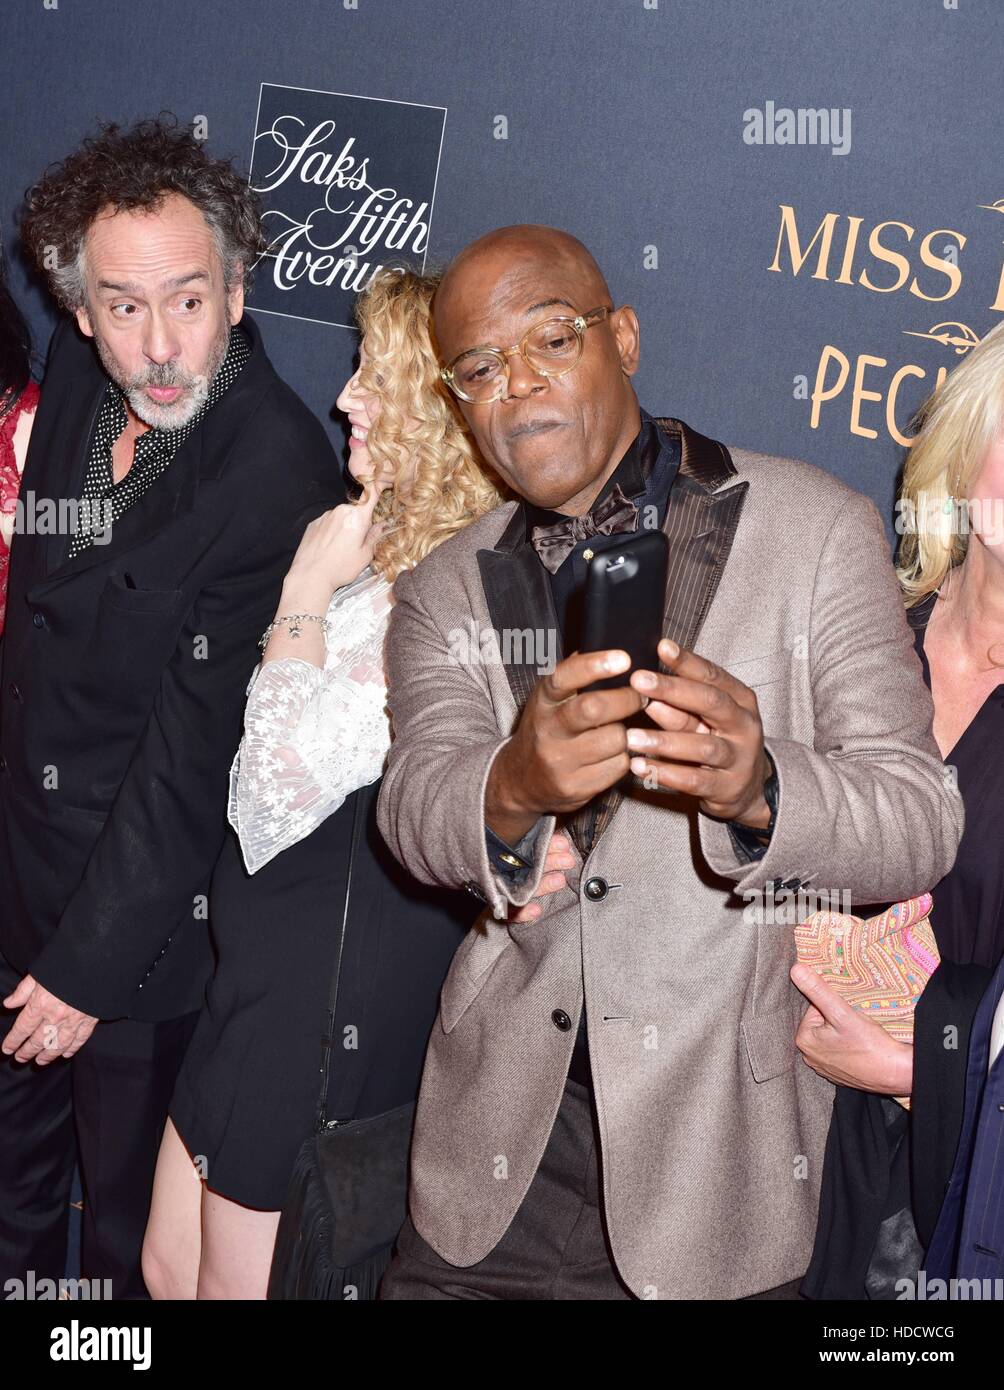 Tim Burton, Jane Goldman and Samuel L. Jackson attending the New York premiere of 'Miss Peregrine's Home for Peculiar Children' held at Saks Fifth Avenue in New York City.  Featuring: Tim Burton, Jane Goldman, Samuel L. Jackson Where: New York City, New Y Stock Photo